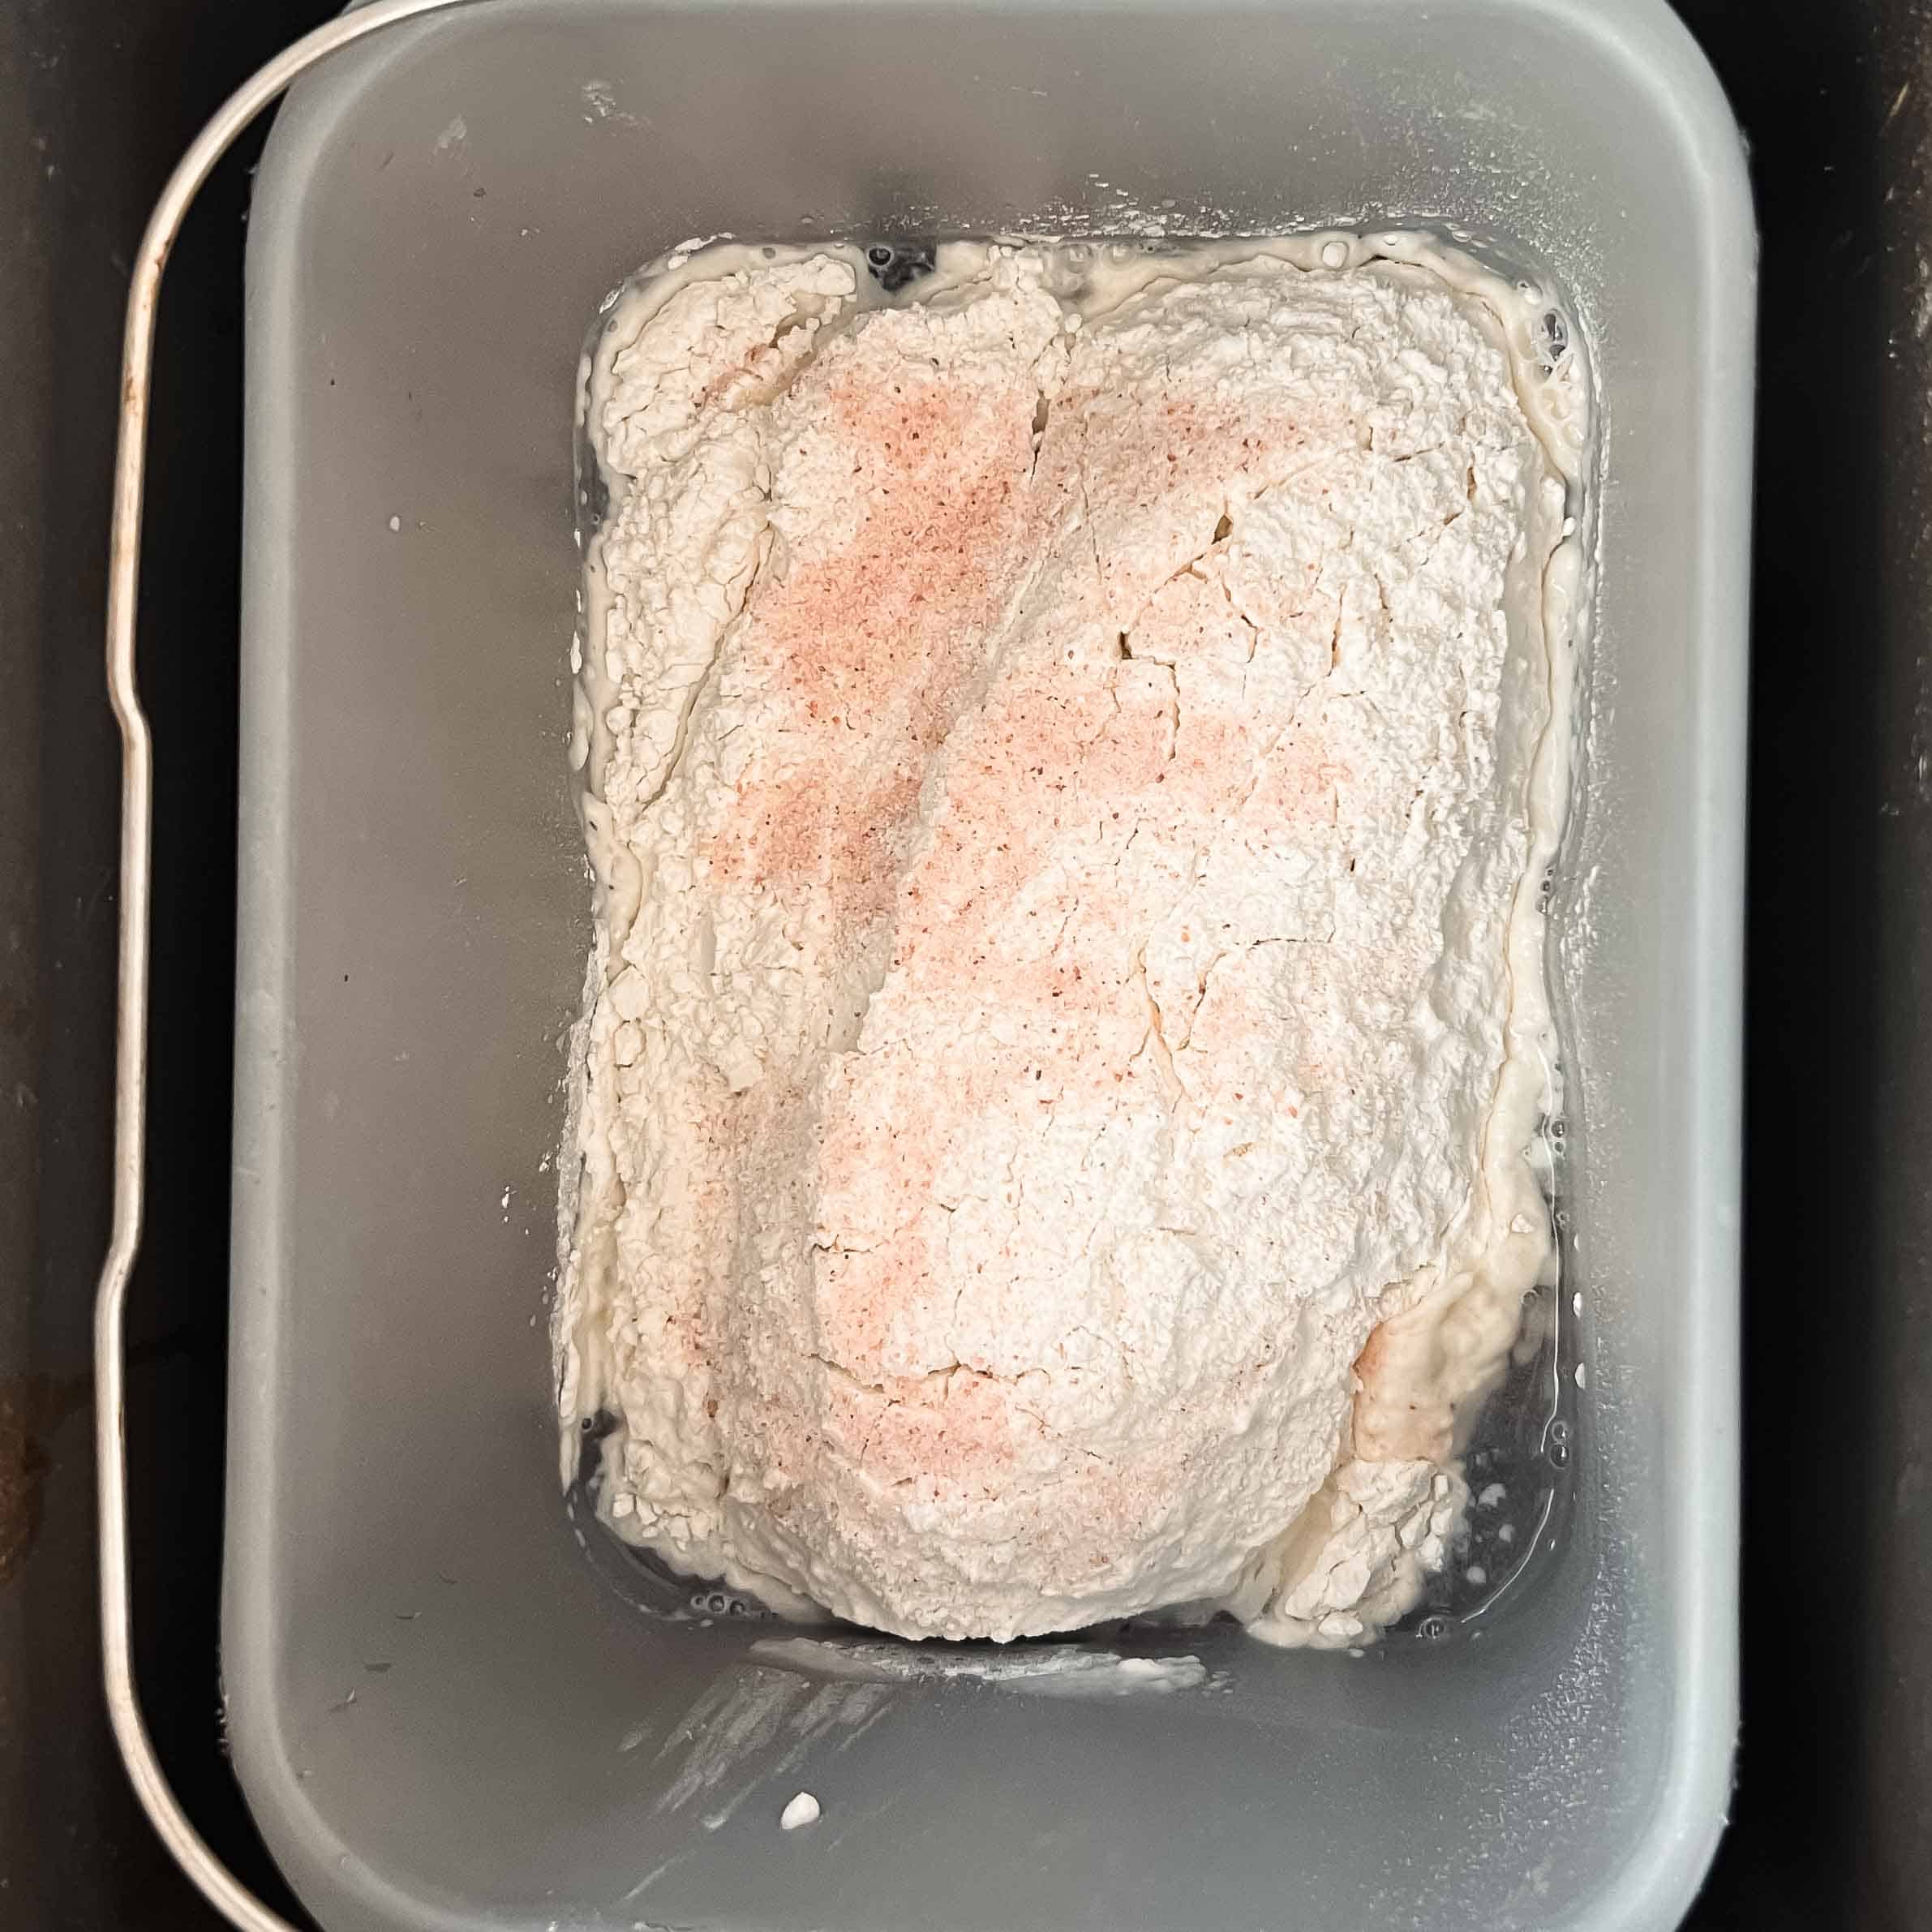 Sourdough ingredients in a bread machine pan without yeast and with pink sea salt sprinkled on top.